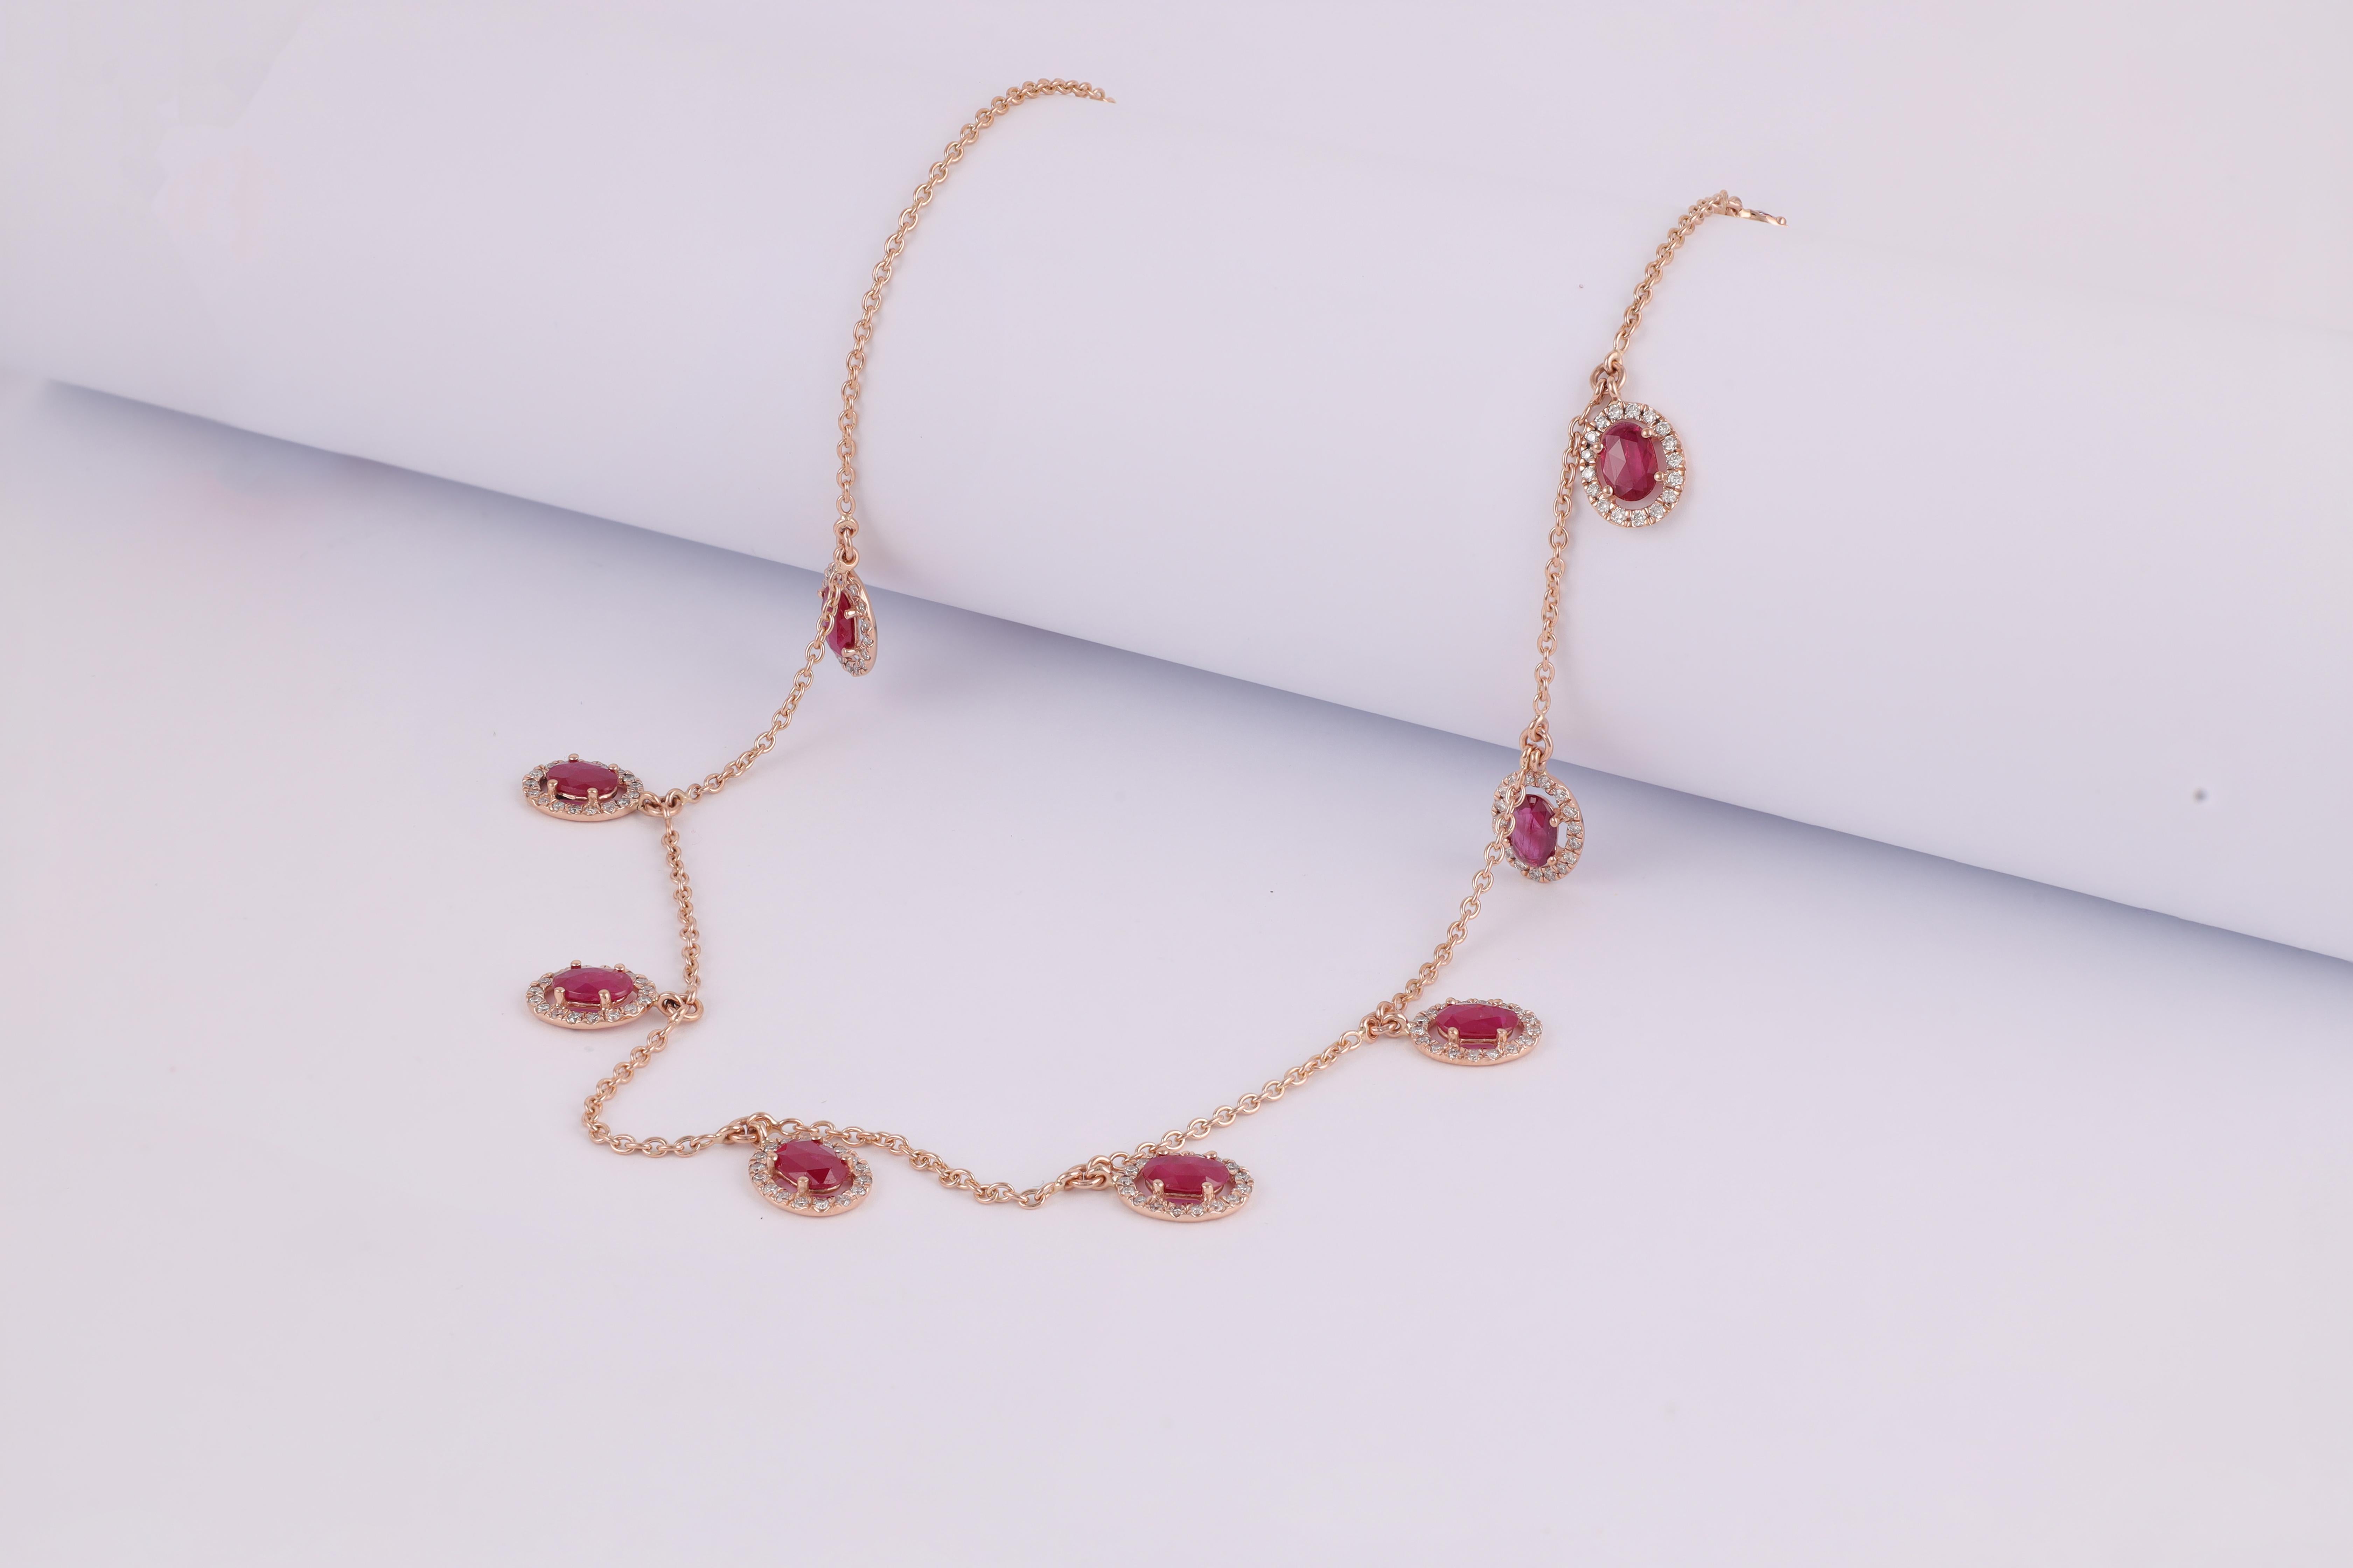 3.02 Carats Ruby & 0.83 Carats Diamond Chain Necklace in 18k Rose Gold In New Condition For Sale In Jaipur, Rajasthan